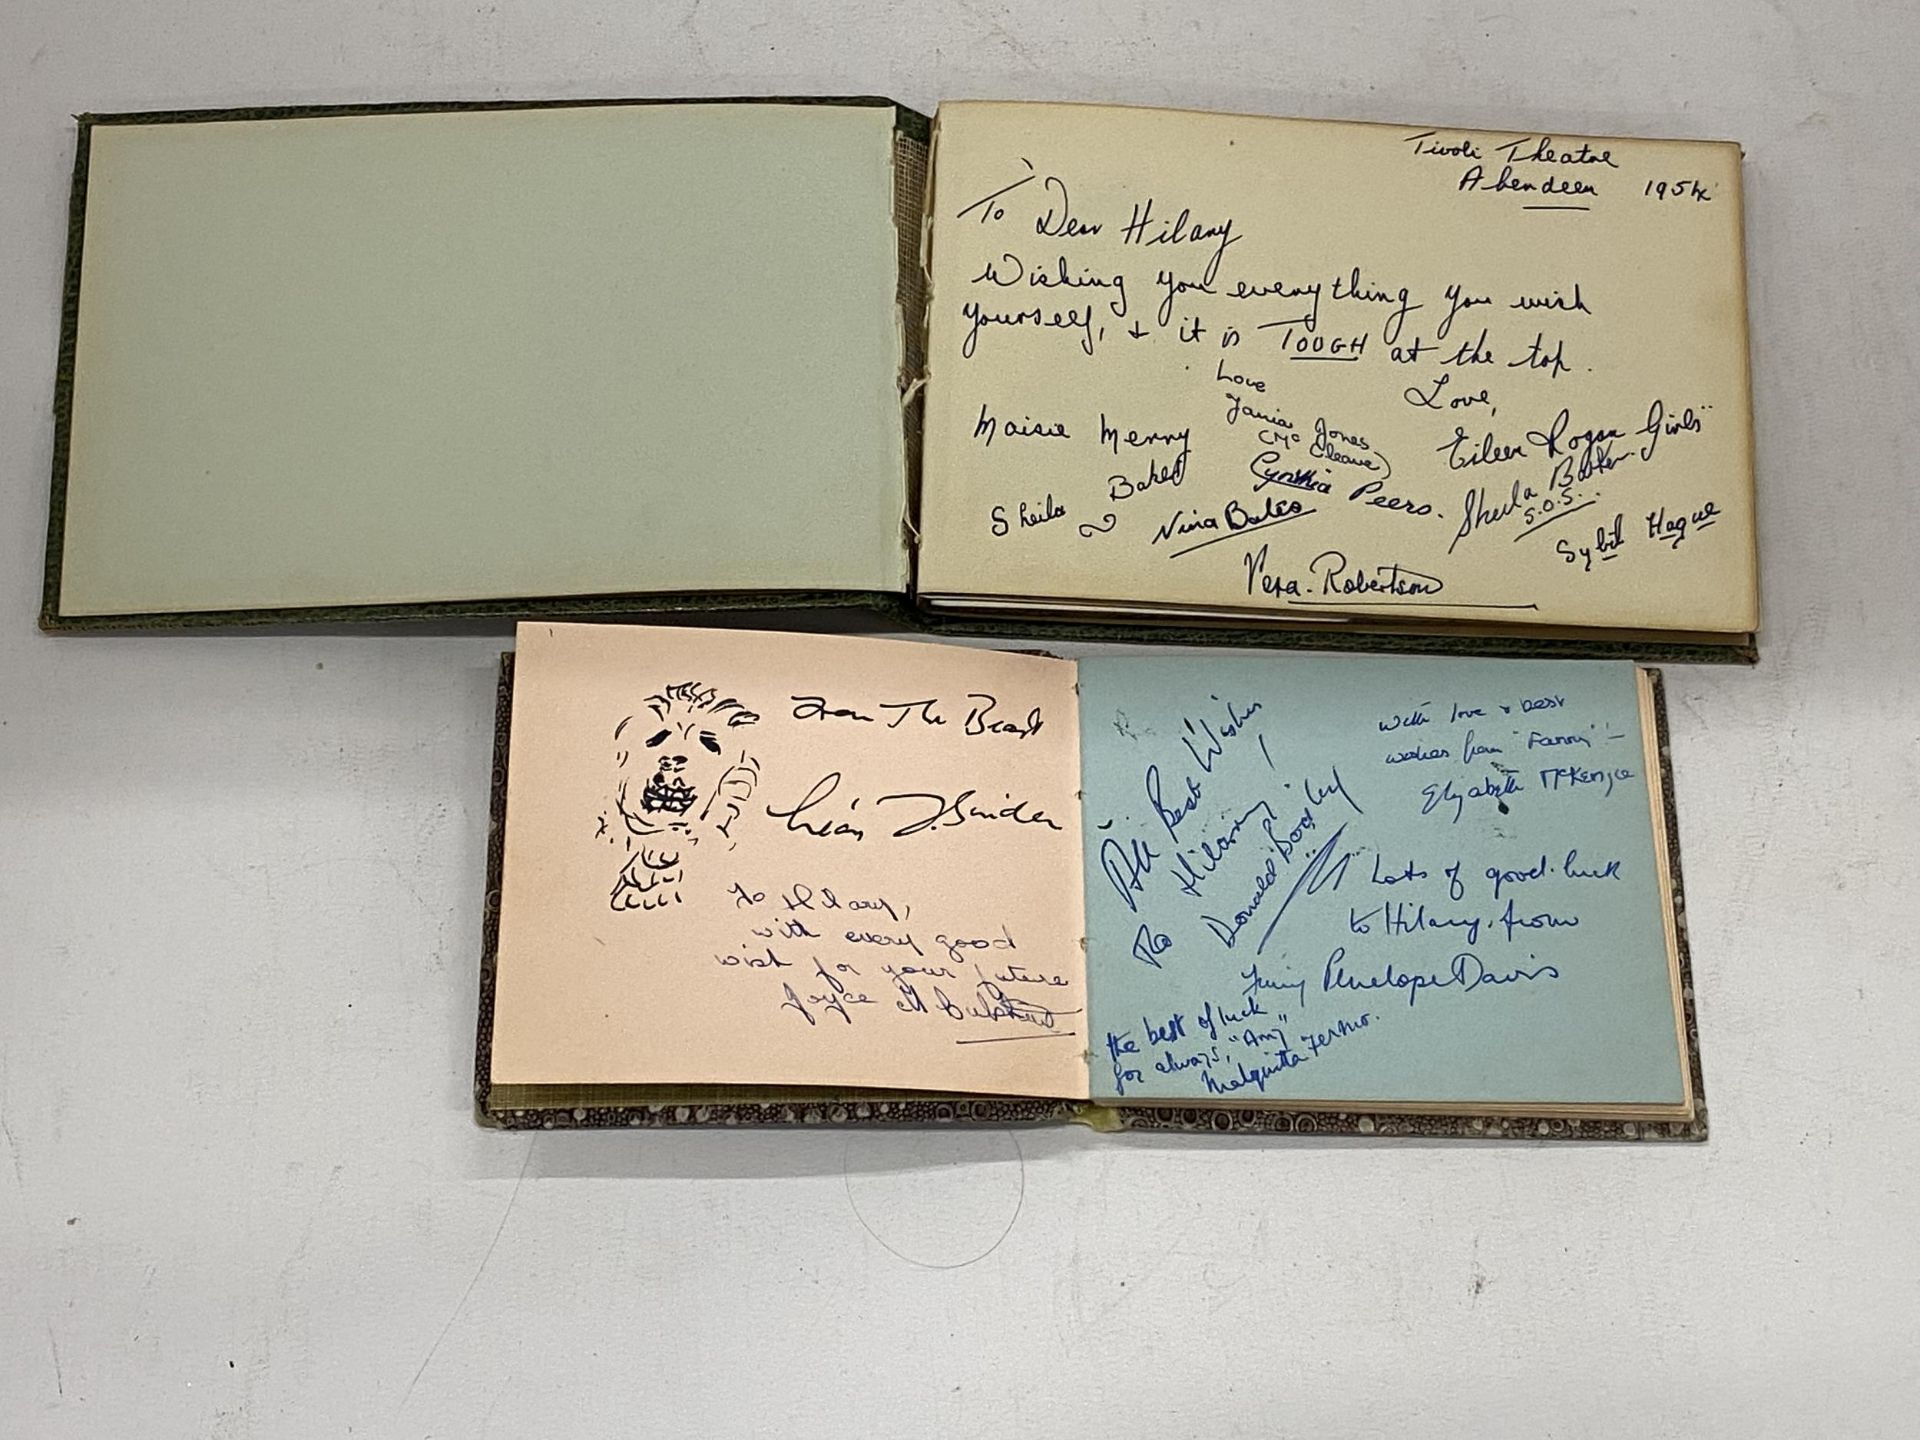 A 1940'S HAND SIGNED AUTOGRAPH BOOK OF ACTORS AND MUSICIANS, OBTAINED BY A BBC FILM MAKER, TO